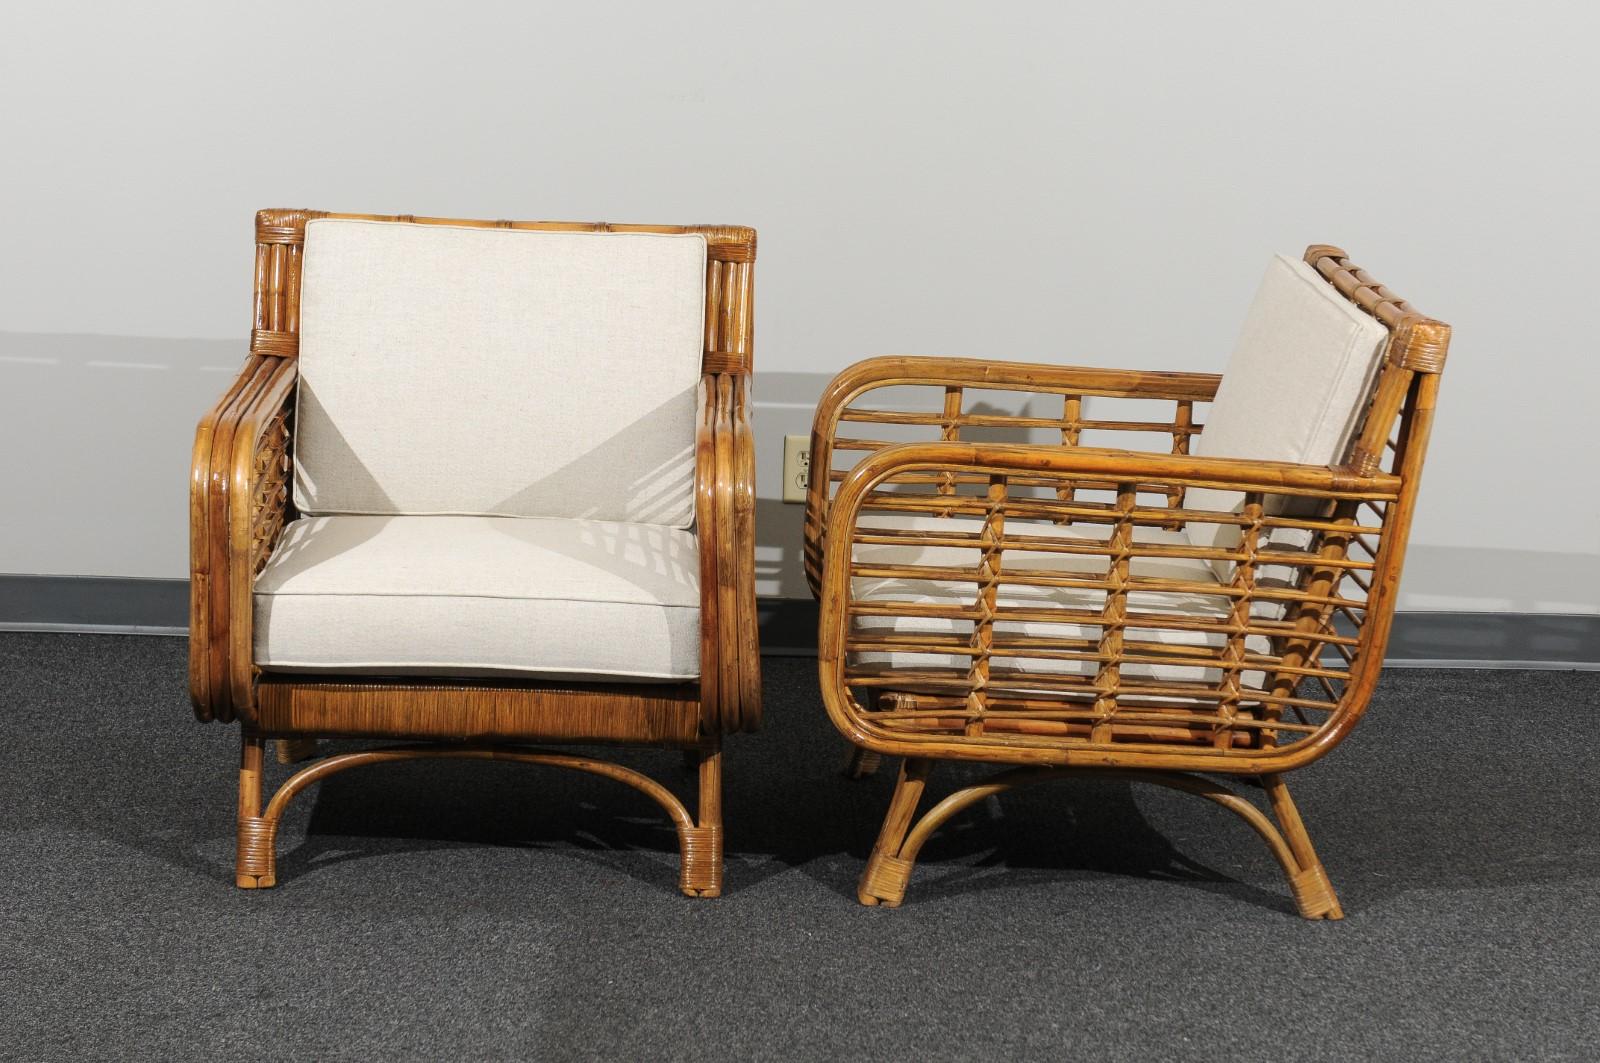 Set of 4 Fabulous Restored Birdcage Style Rattan and Cane Loungers, circa 1955 For Sale 5